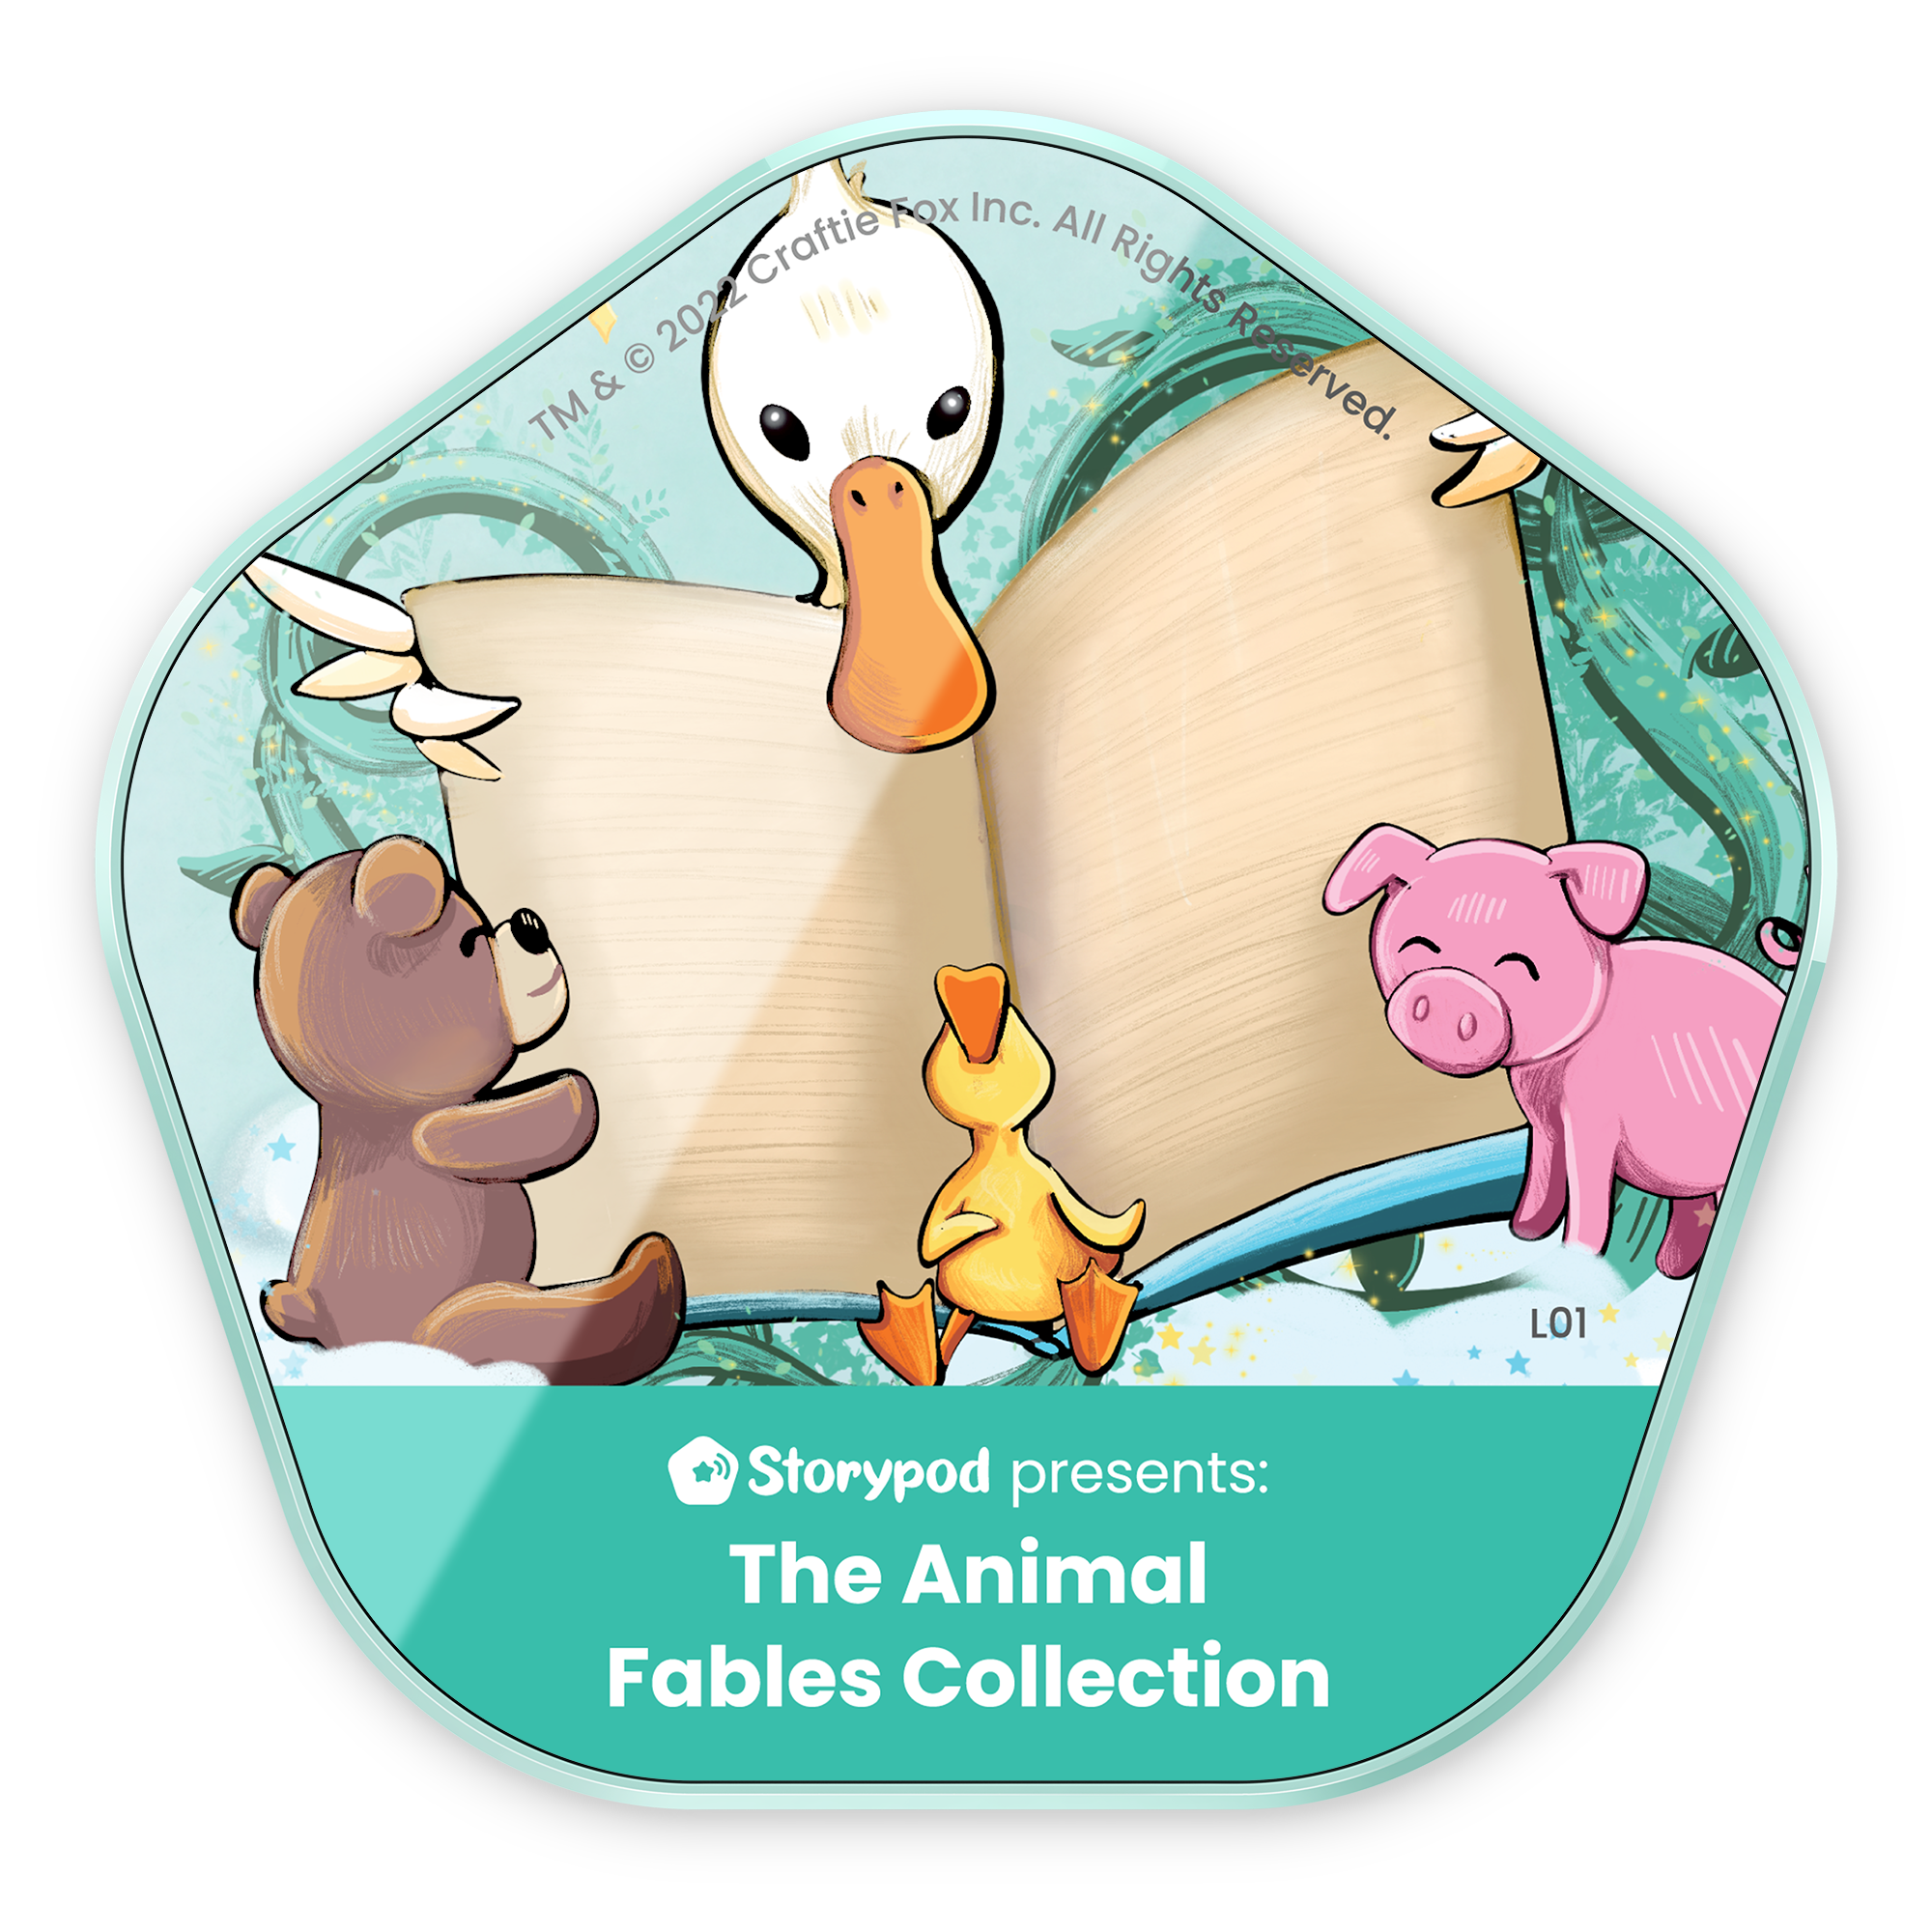 The Animal Fables Collection